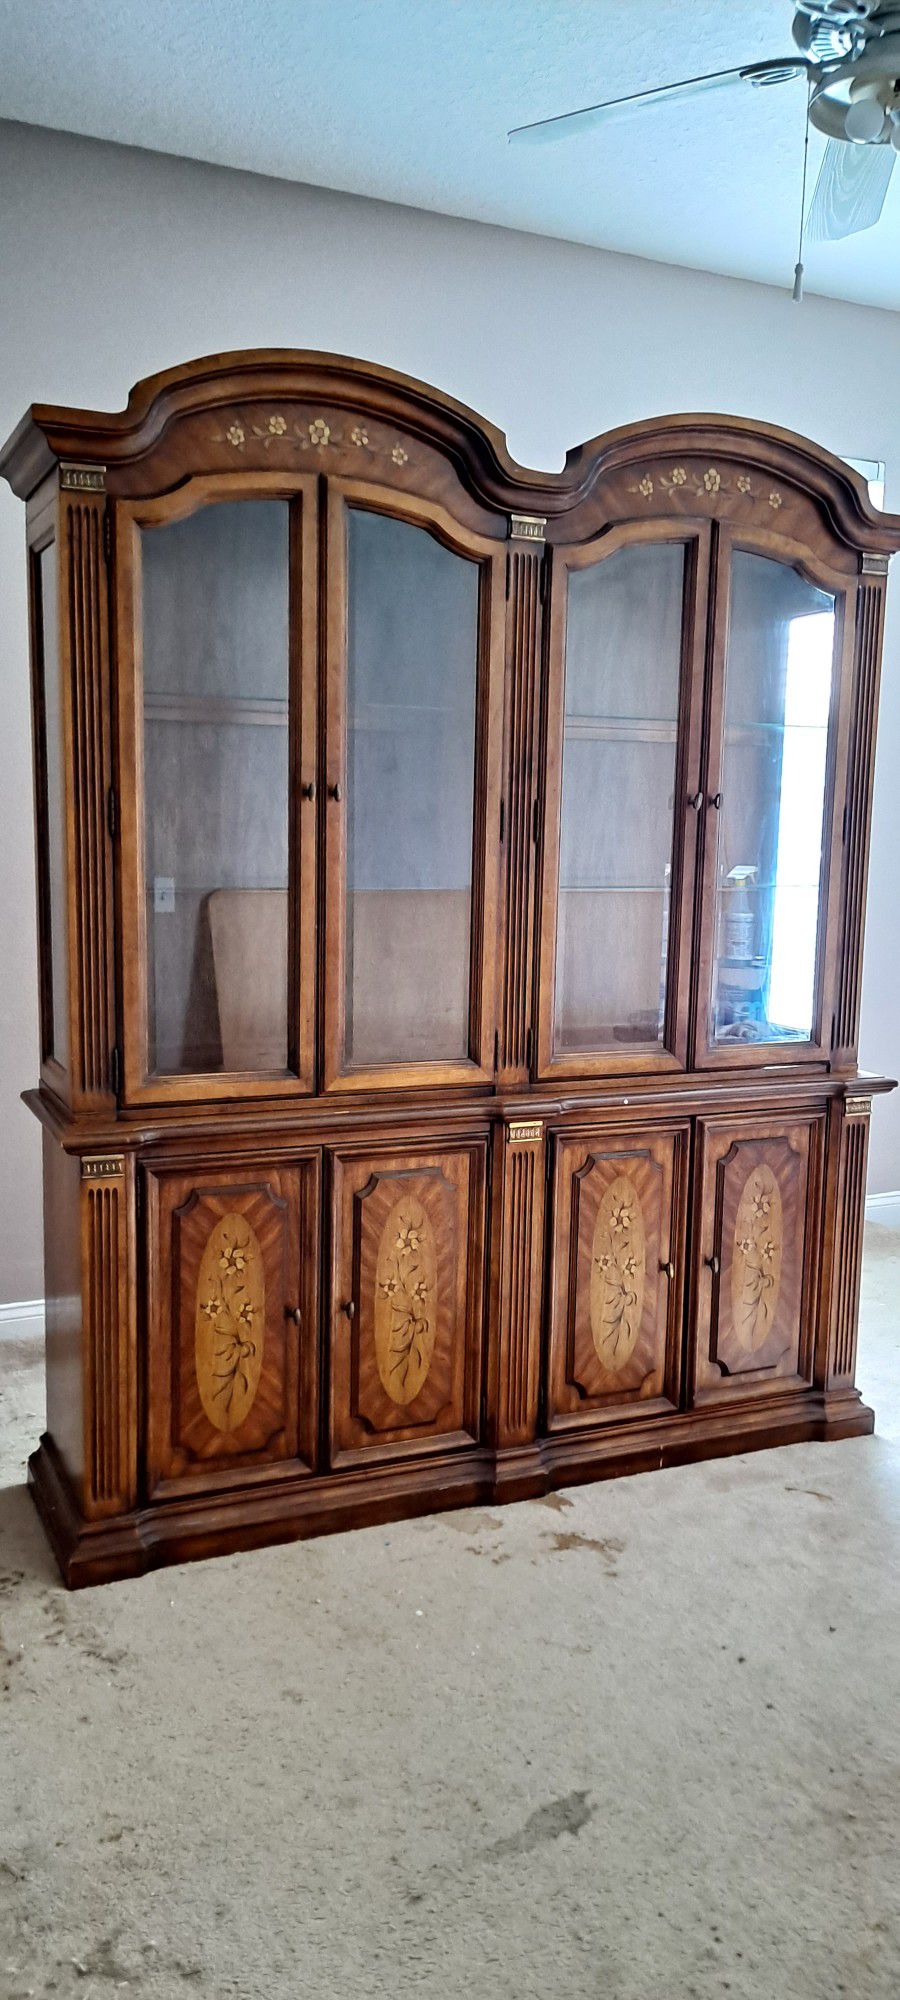 Beautiful Hutch, Excellent condition